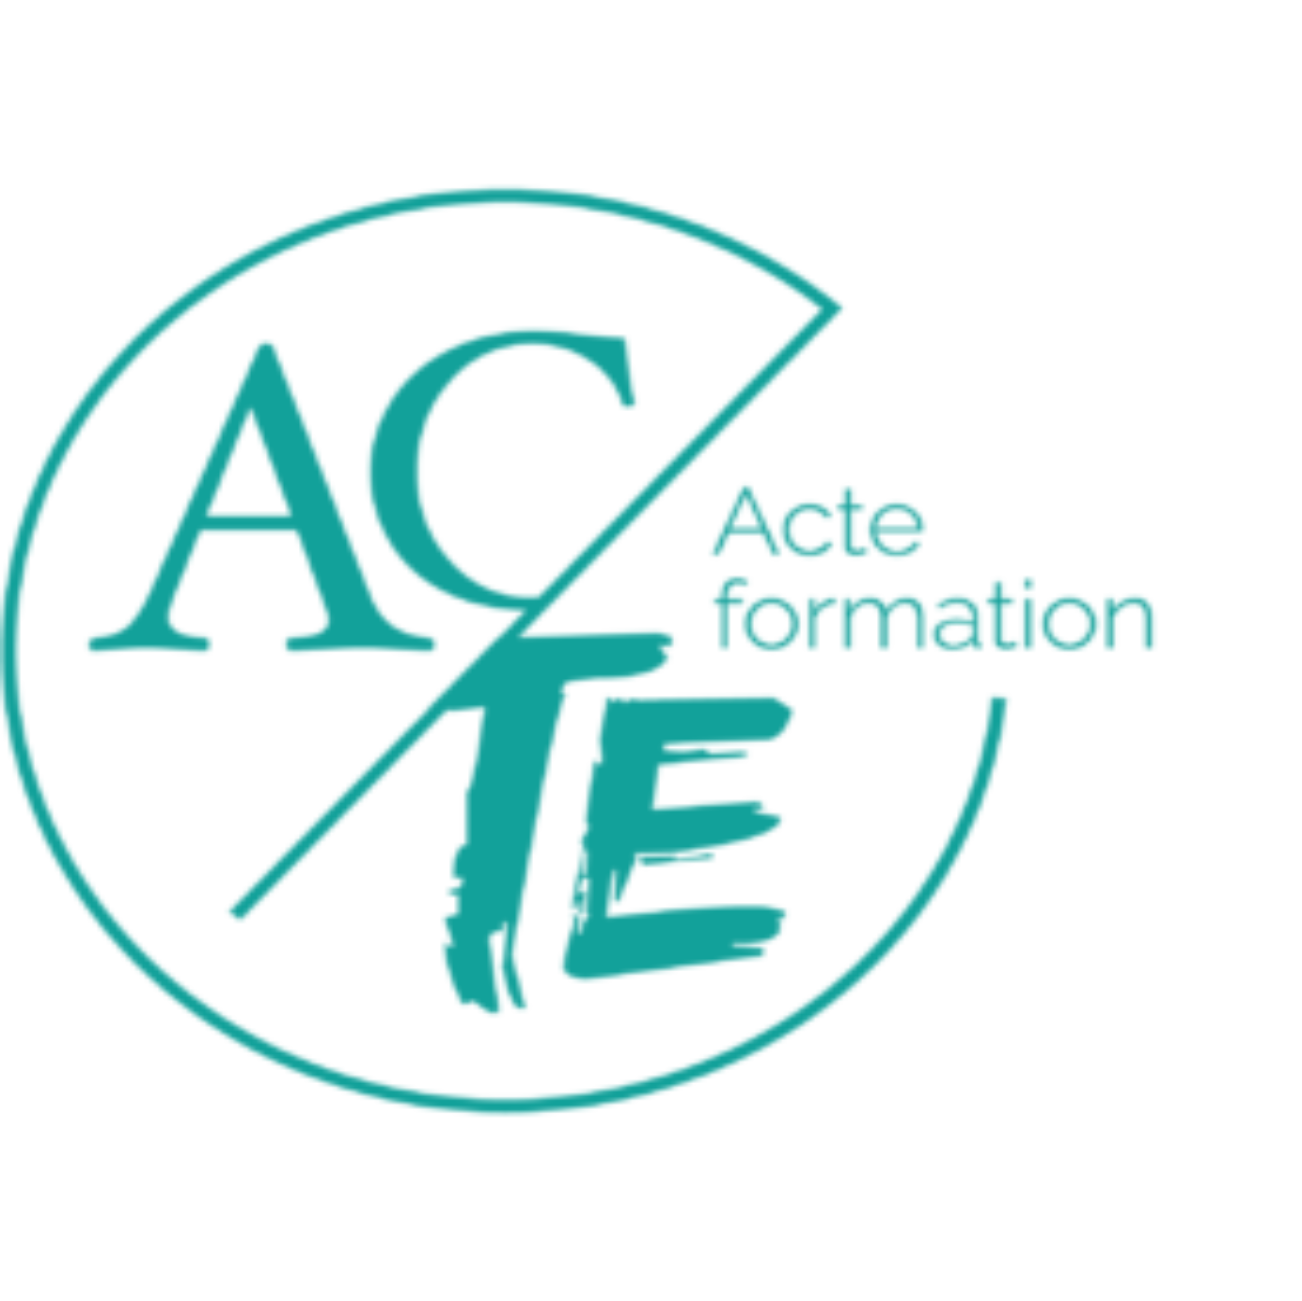 ACTE Formation